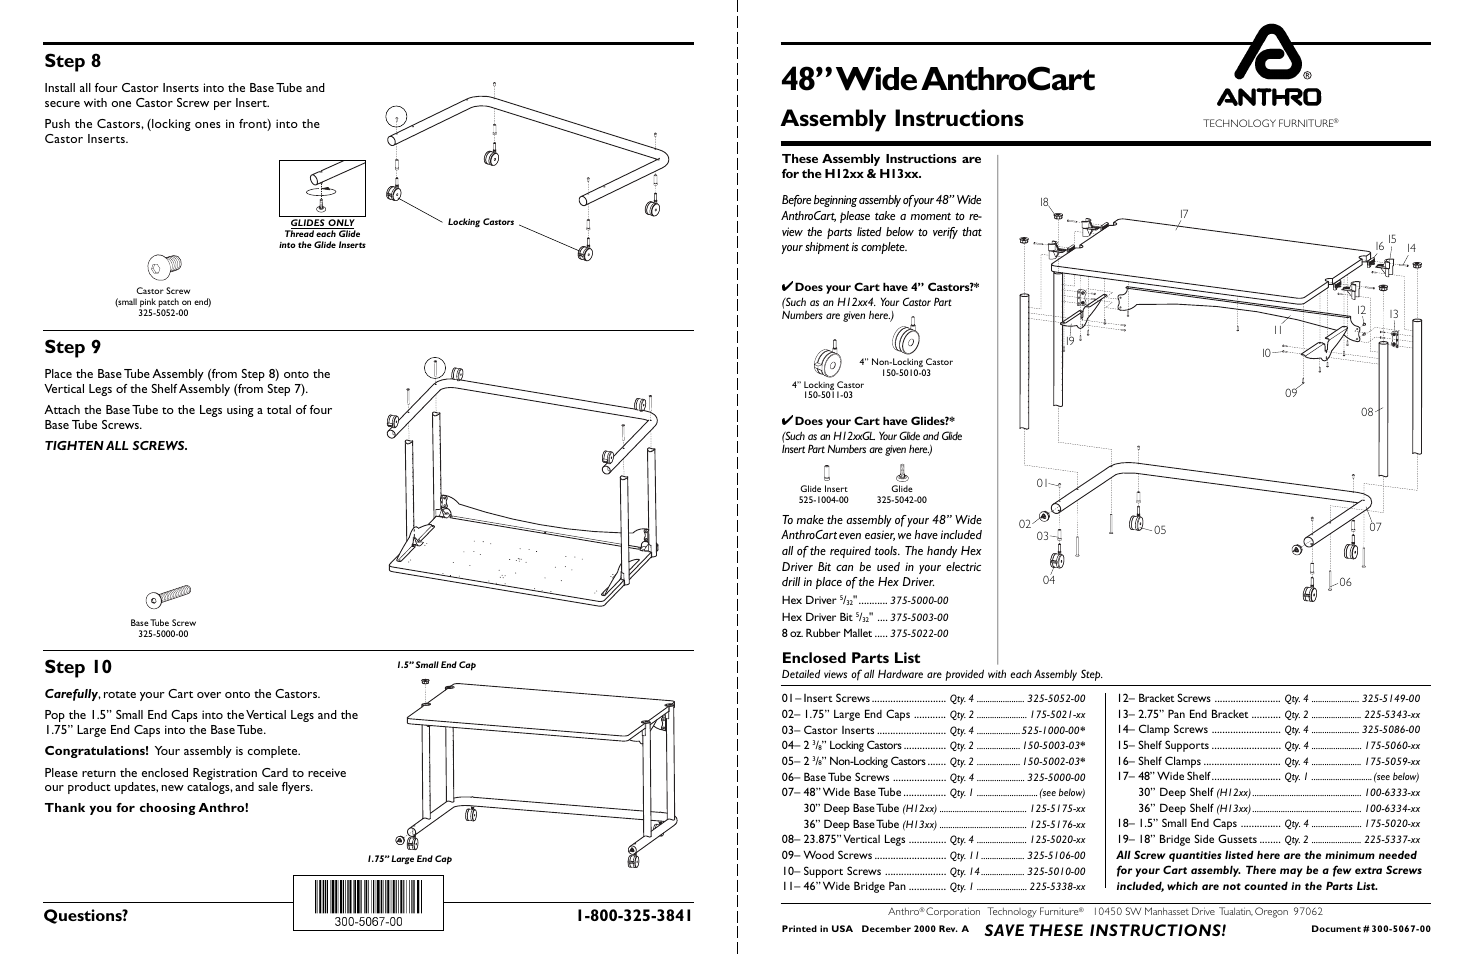 Large AnthroCarts 48W Assembly Instructions